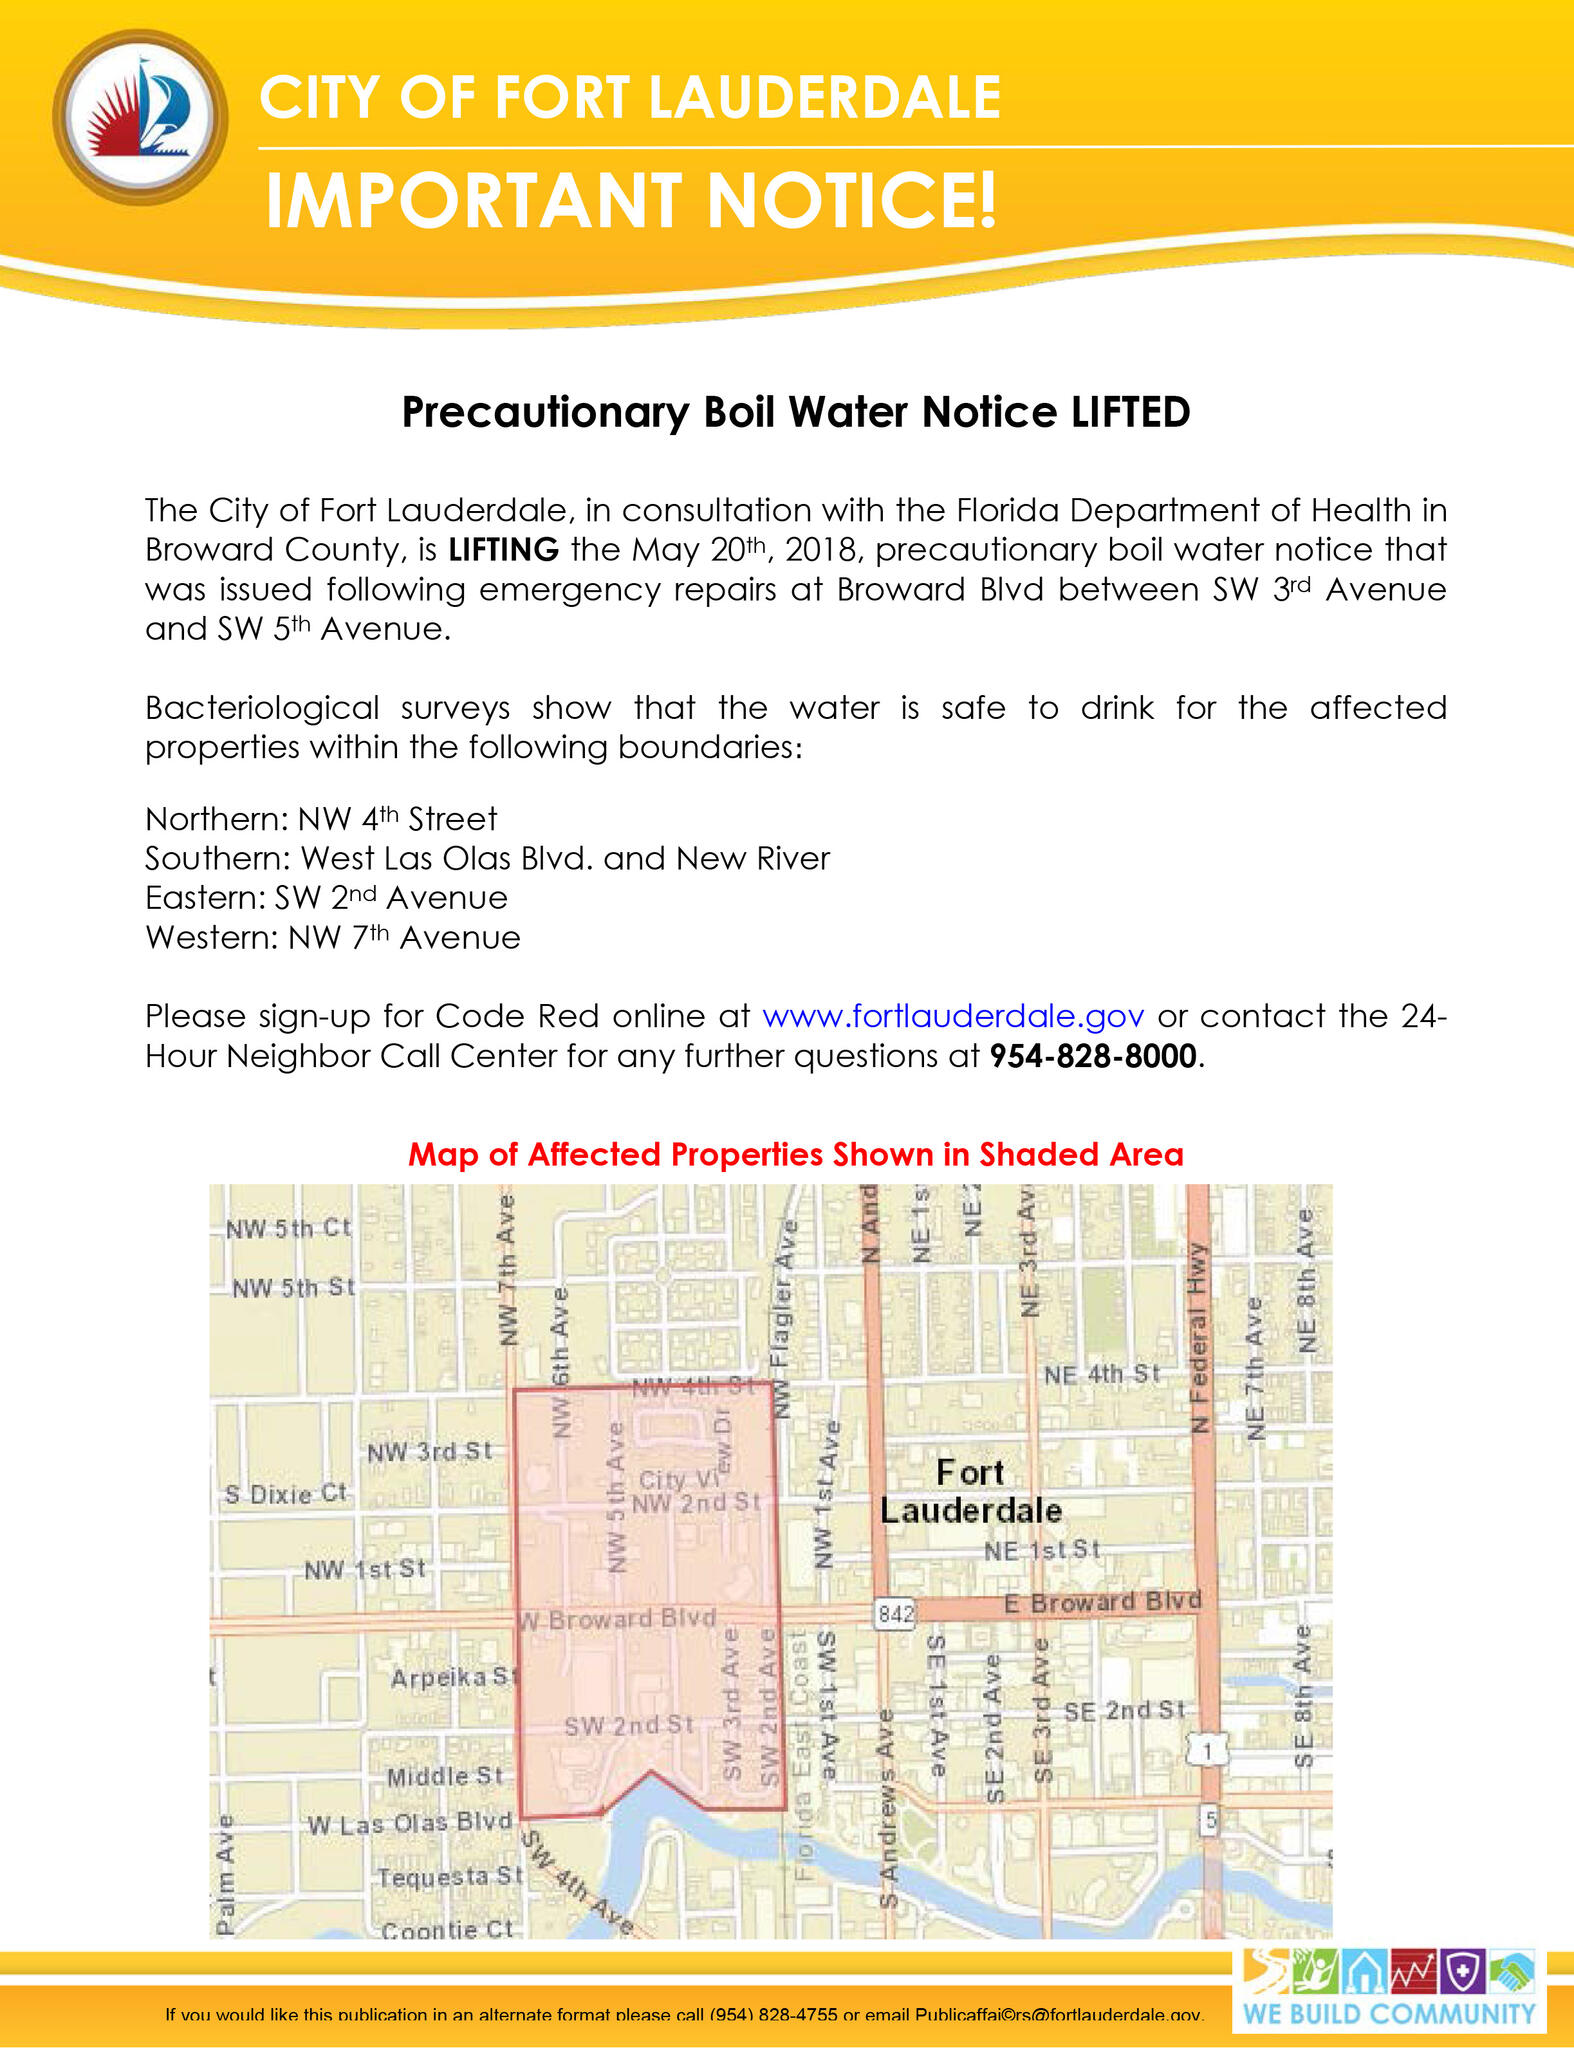 Precautionary Boil Water Notice LIFTED for area near downtown (City of